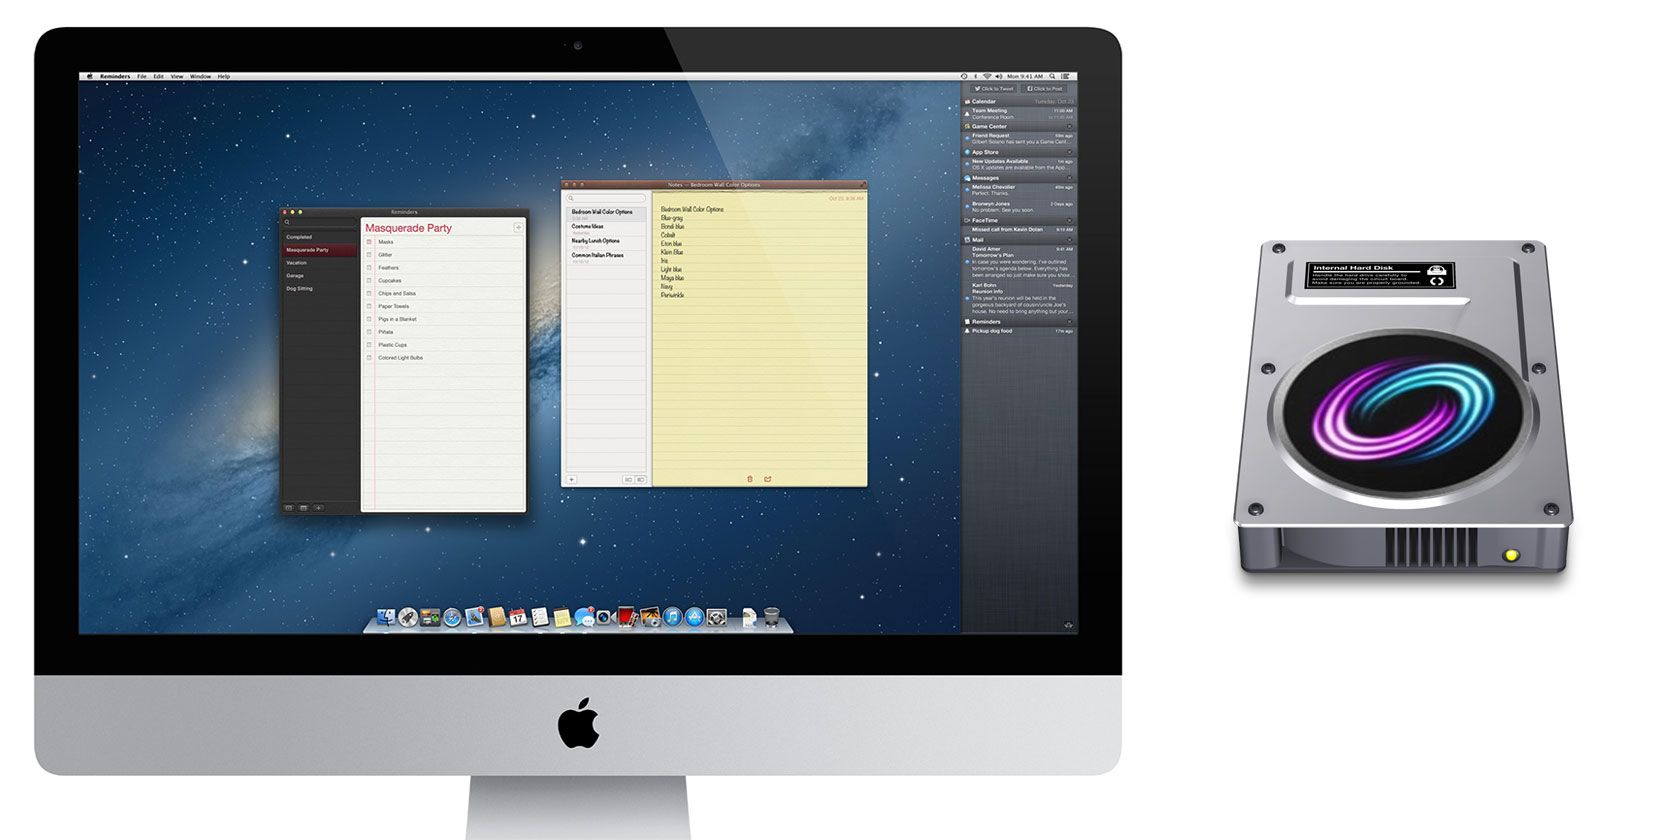 install programs to ssd on mac fusion drive for faster performance